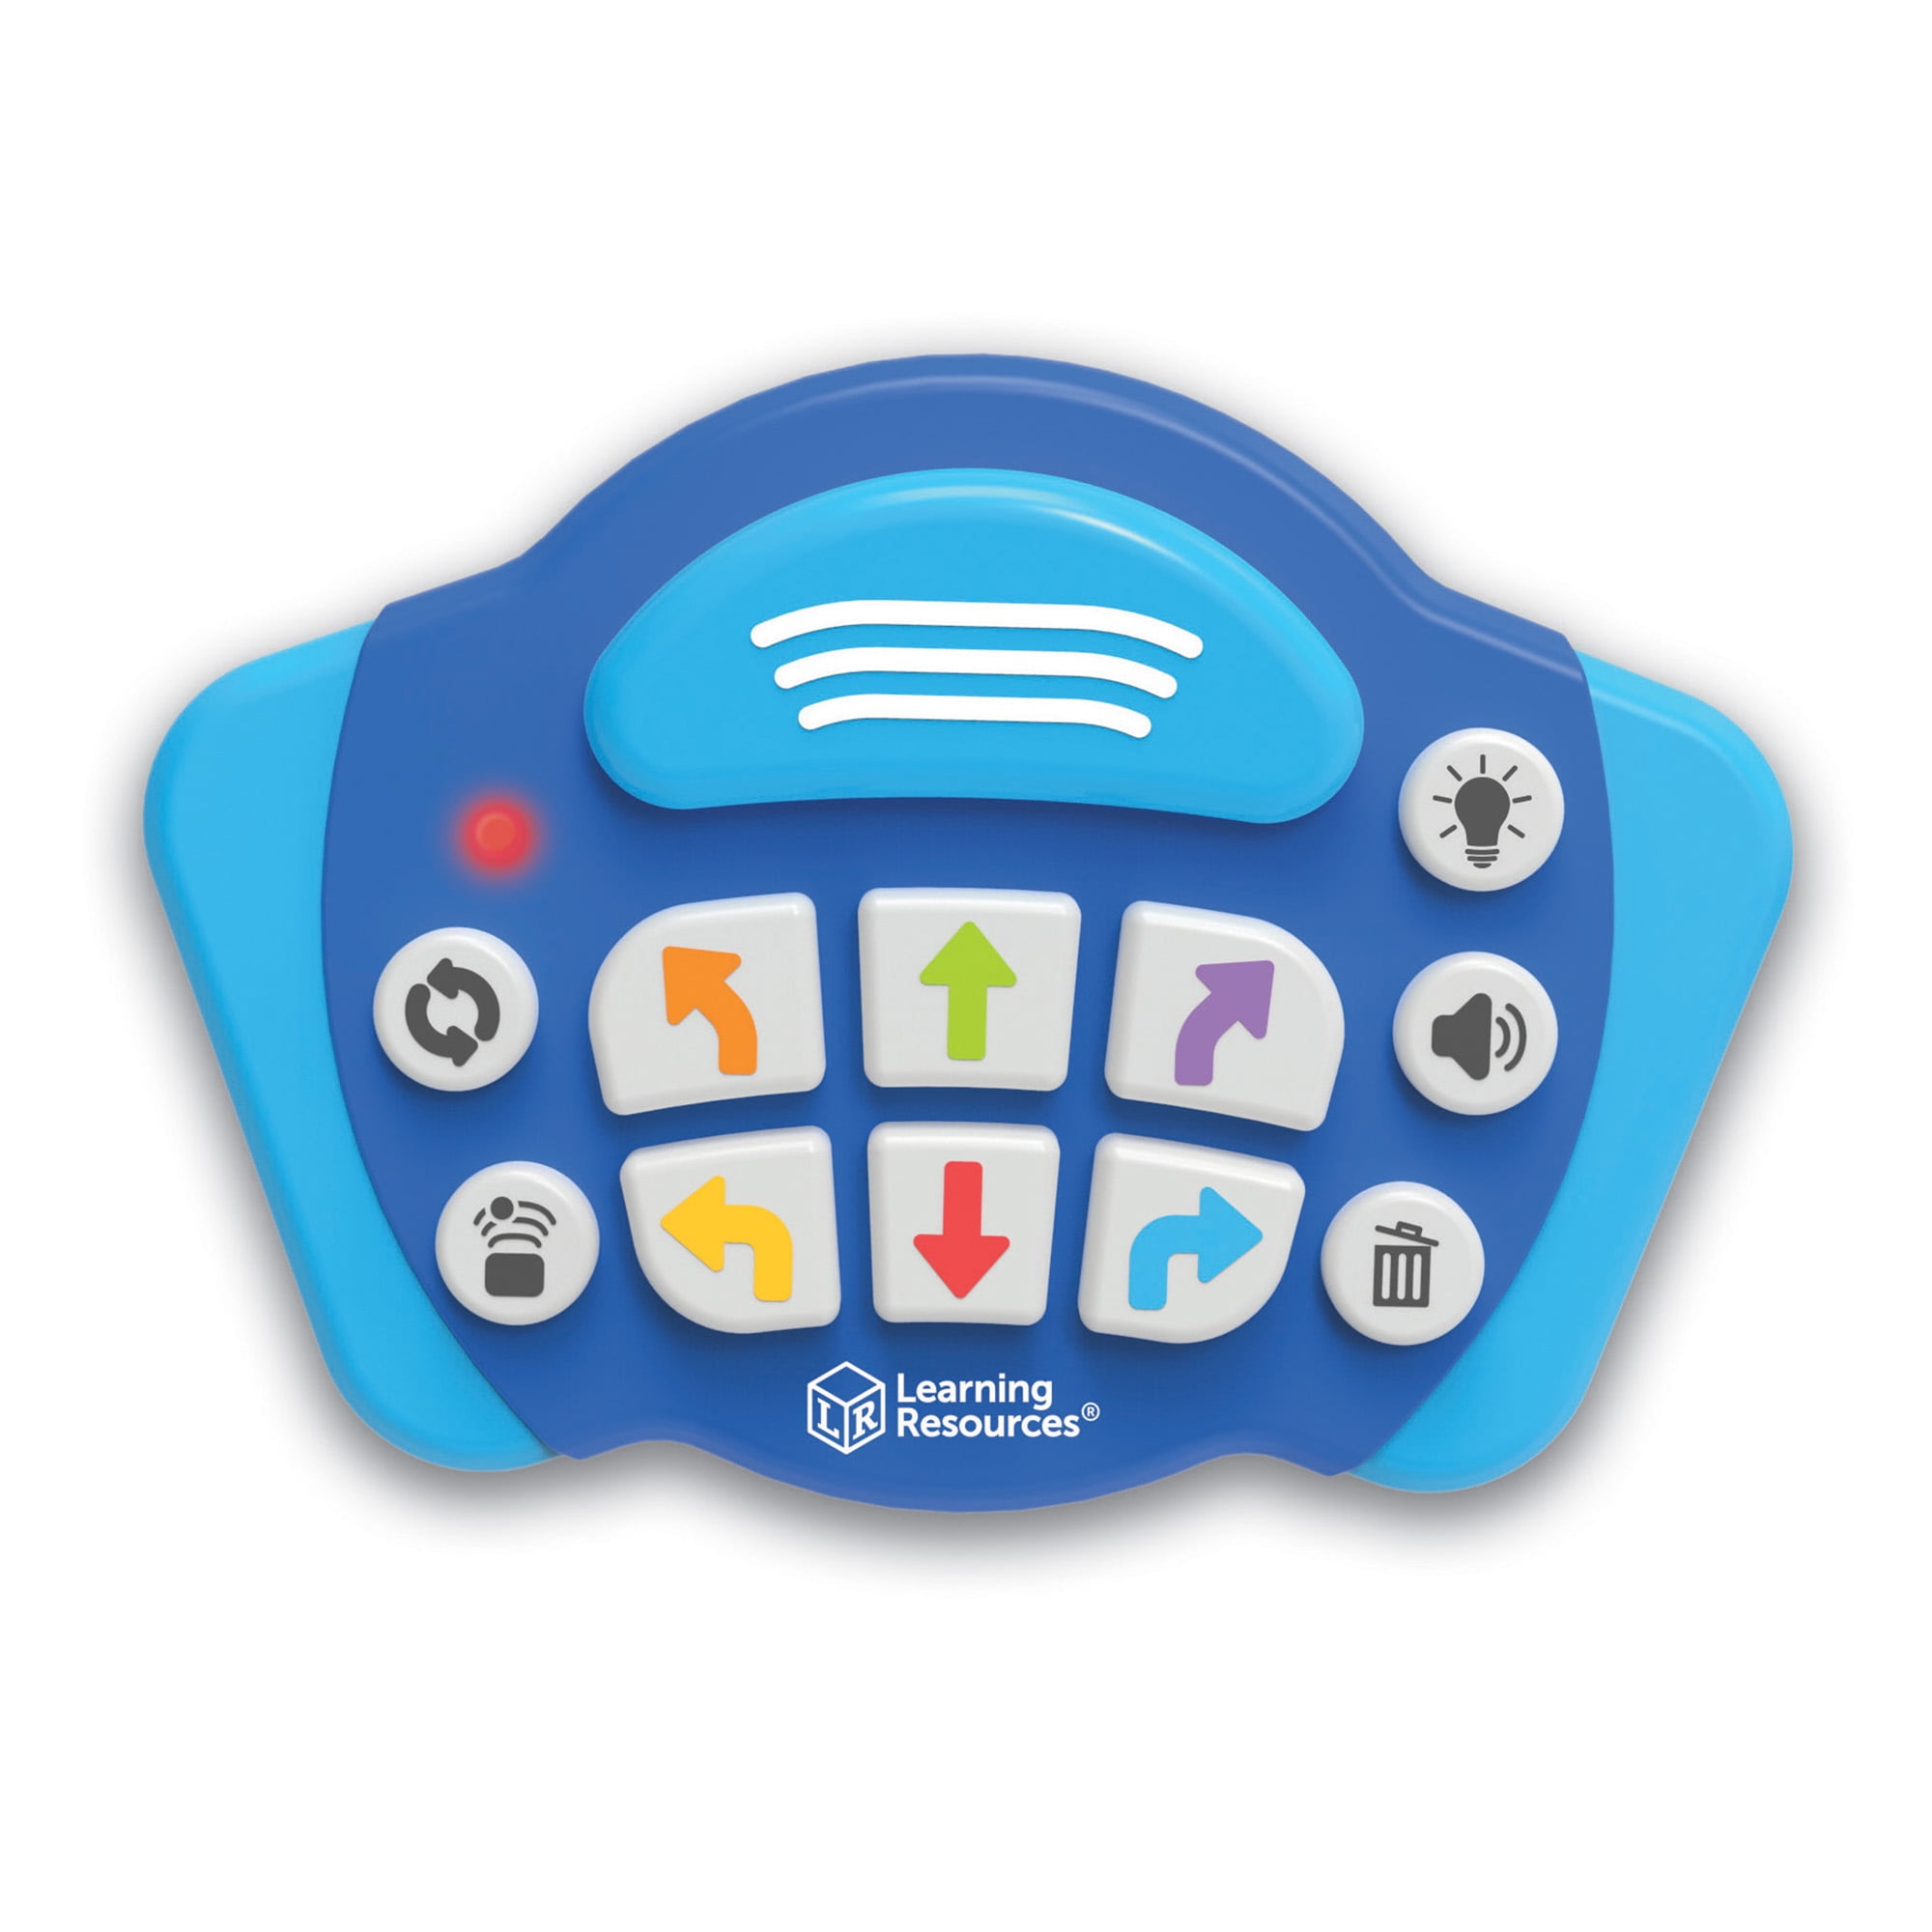 Learning Resources Botley Coding Toy $15 Off at Walmart (Reg. $69)